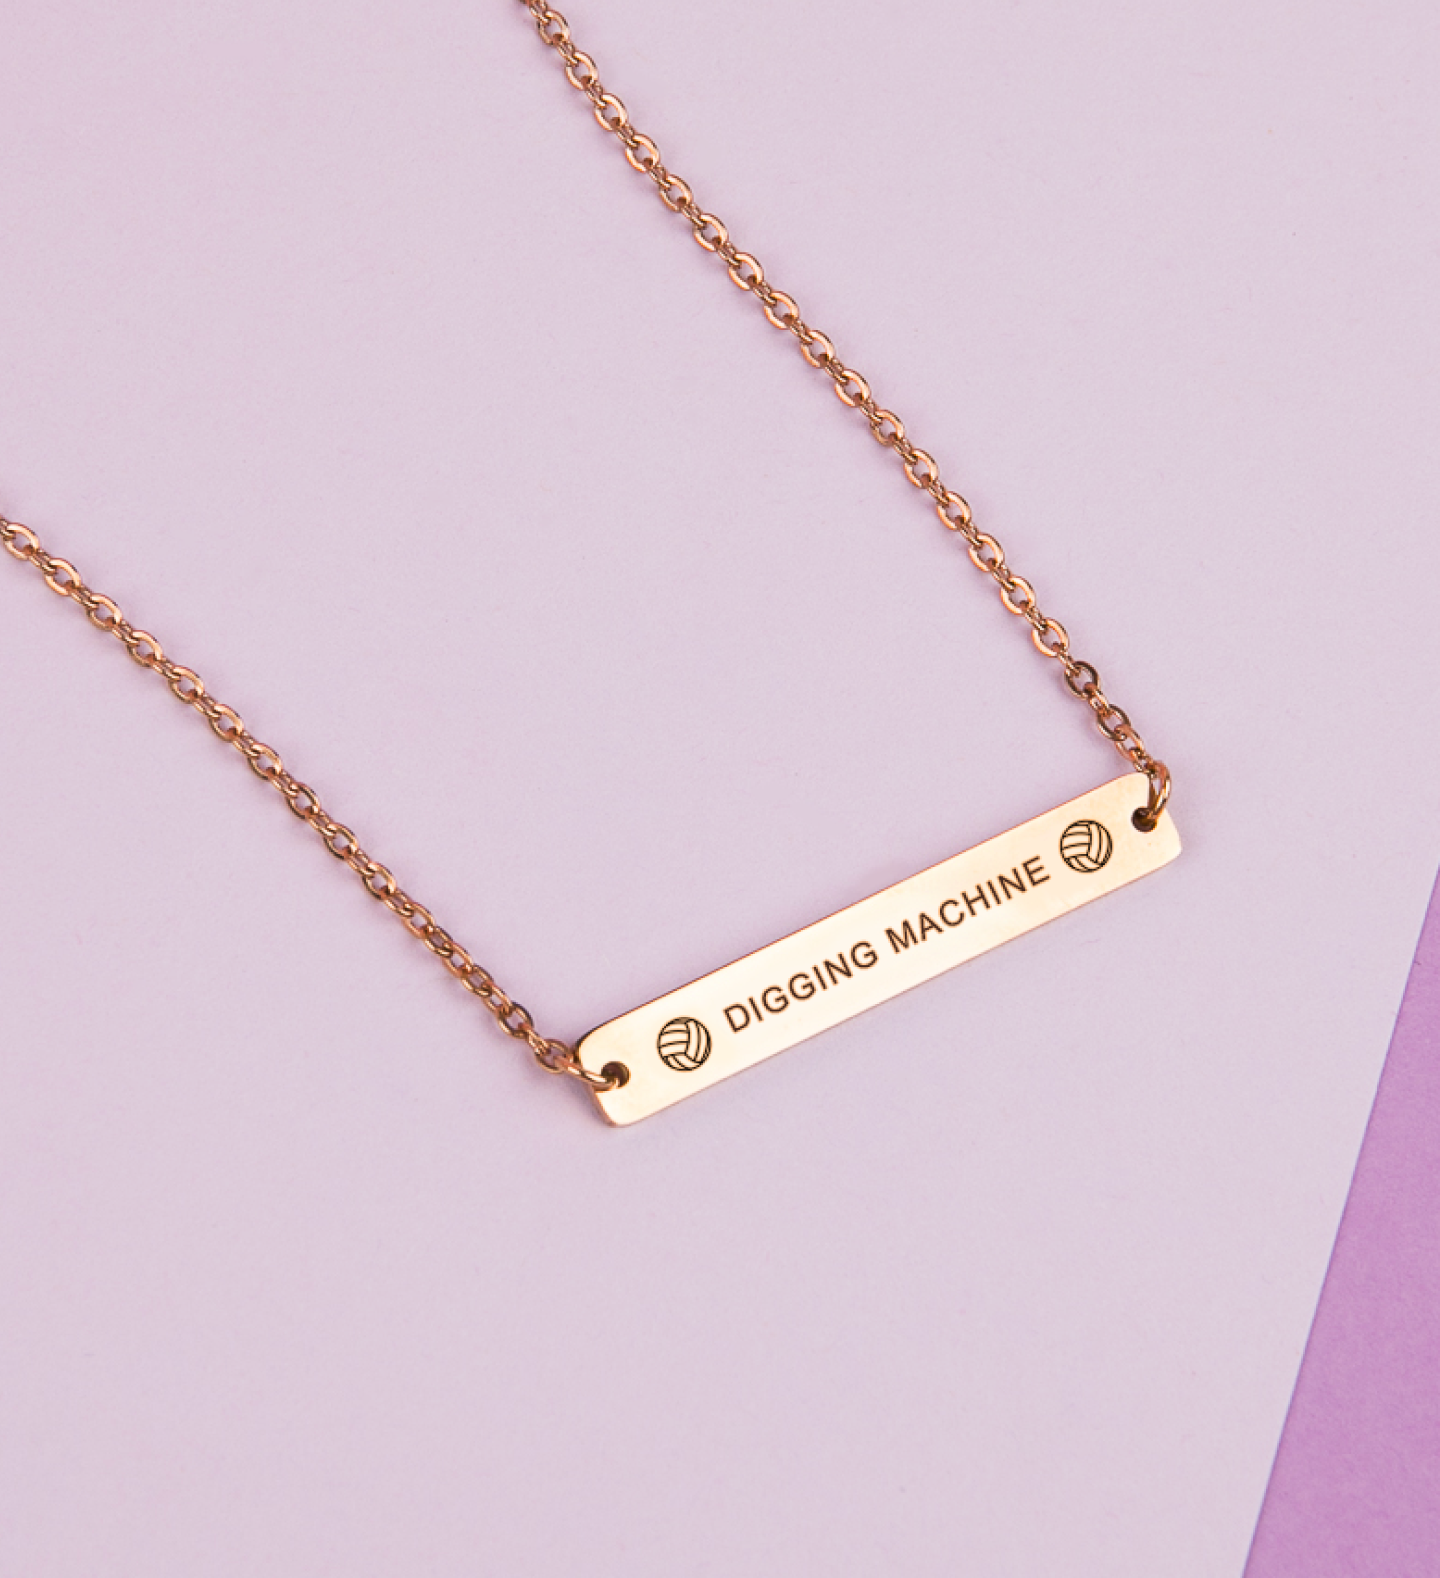 Digging Machine - Volleyball Position Engraved Necklace Bar